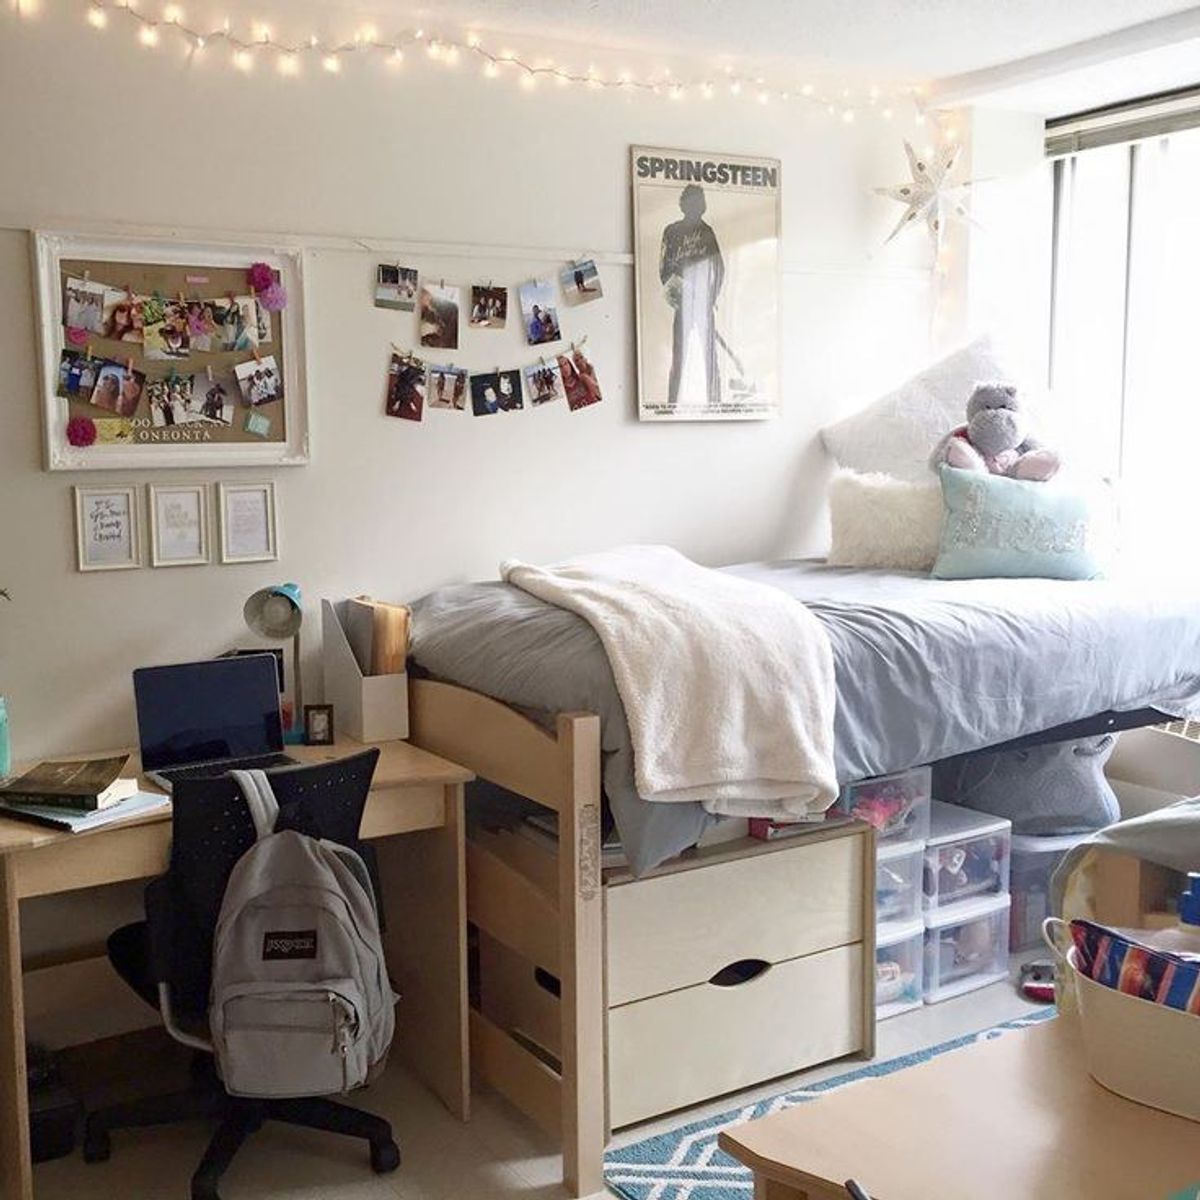 5 Essentials for Your College Dorm Room